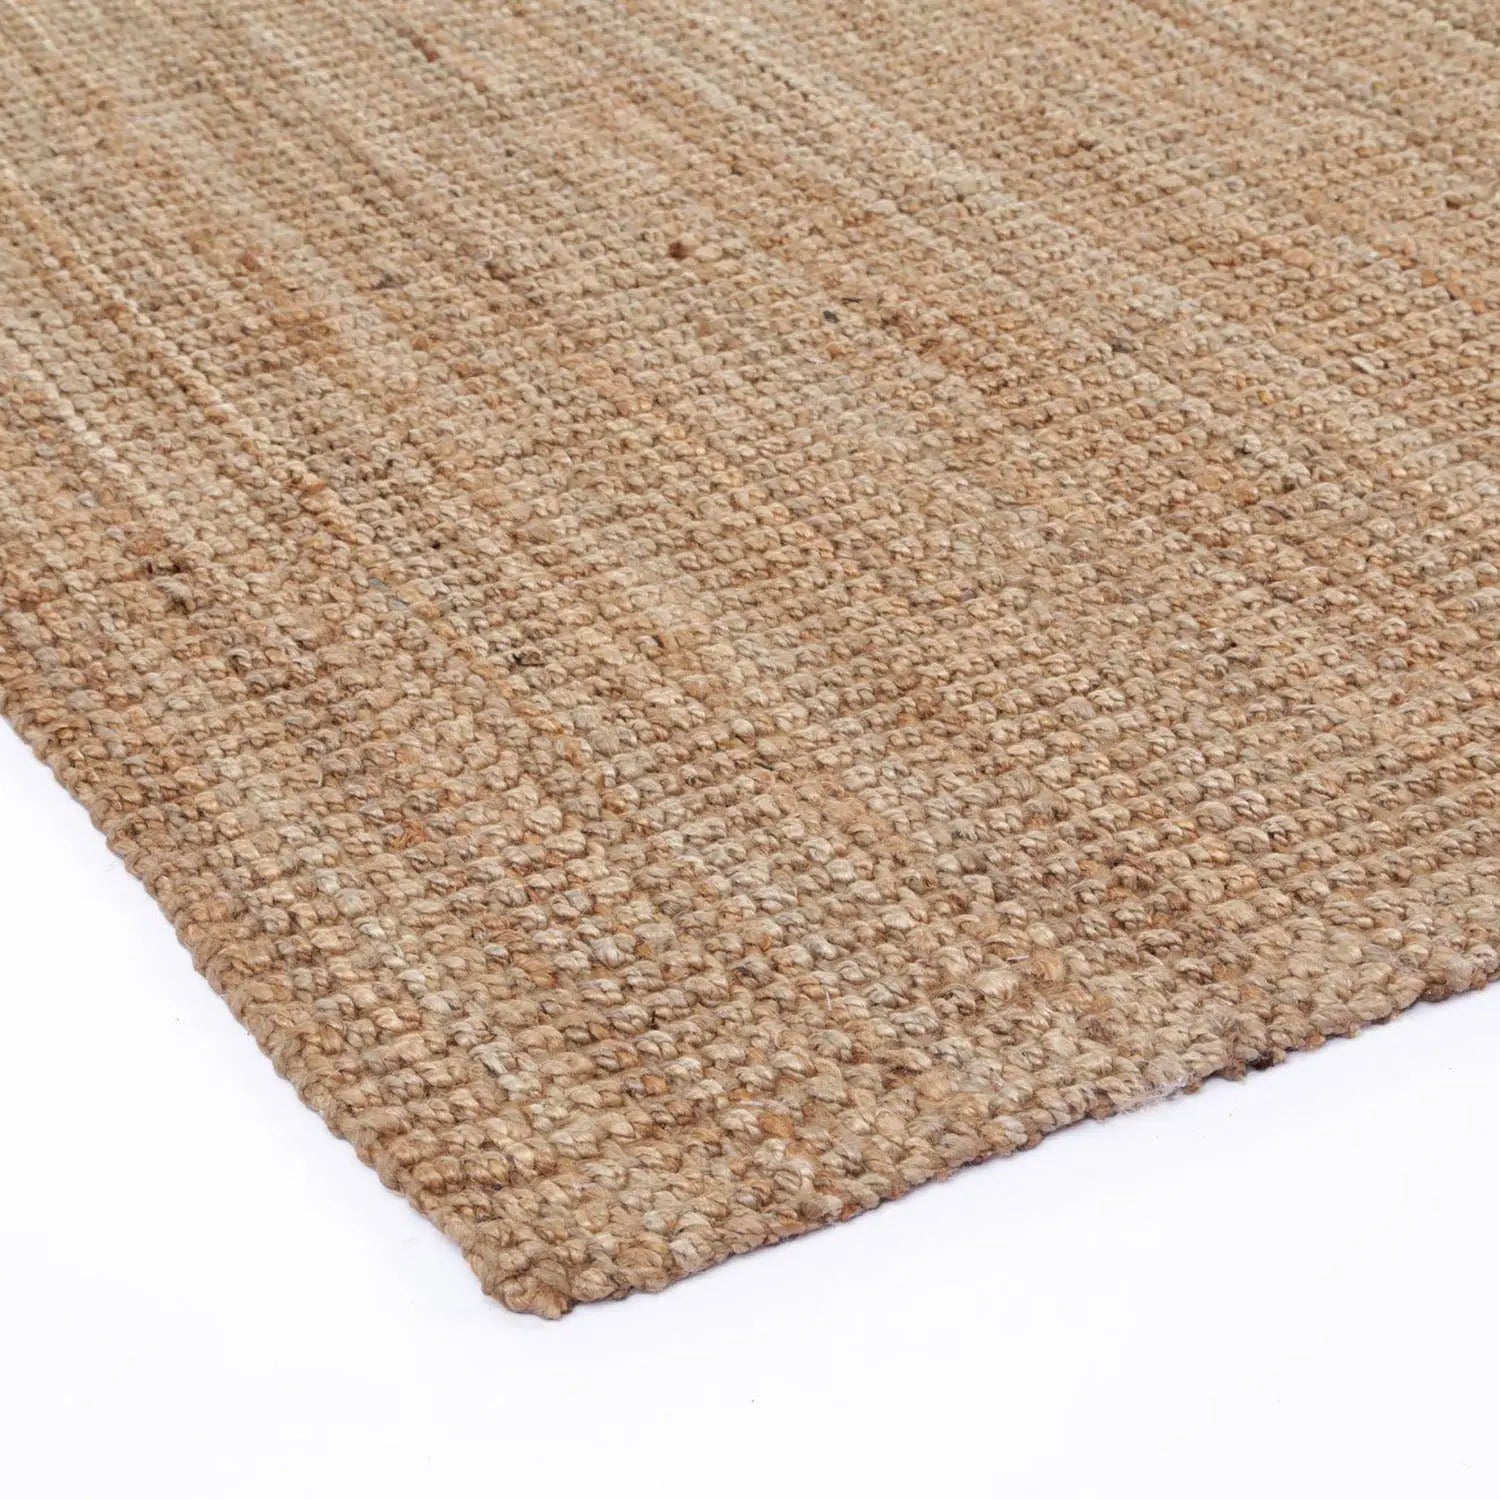 Borneo Jute Woven Rug Natural - Rugs - Rugs a Million